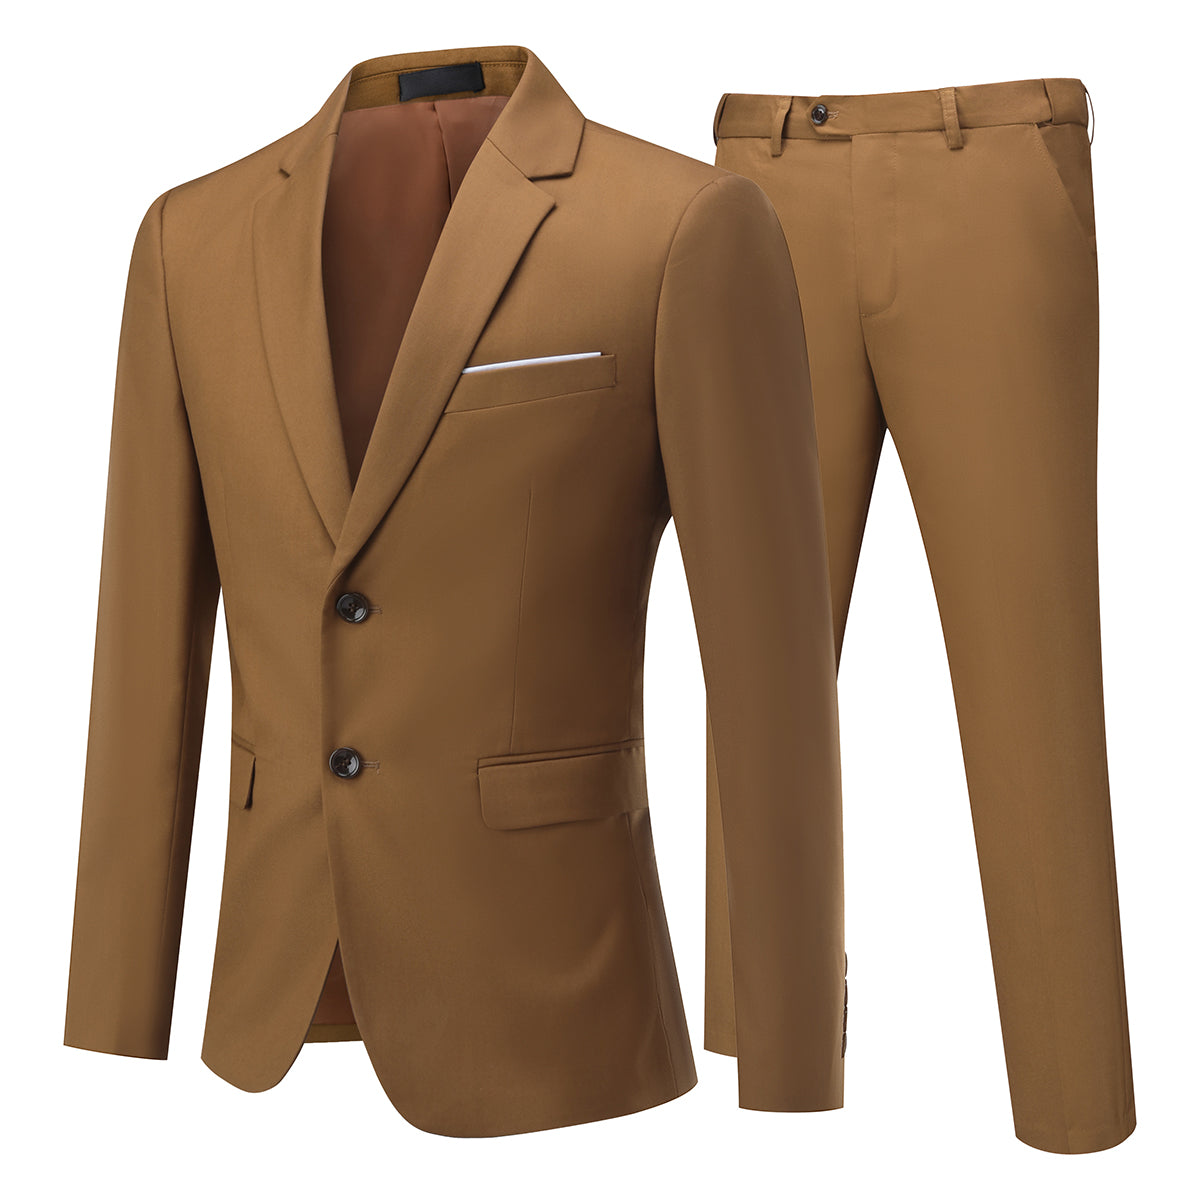 Mens 2-Piece Slim Fit Two Button Coffee Suit